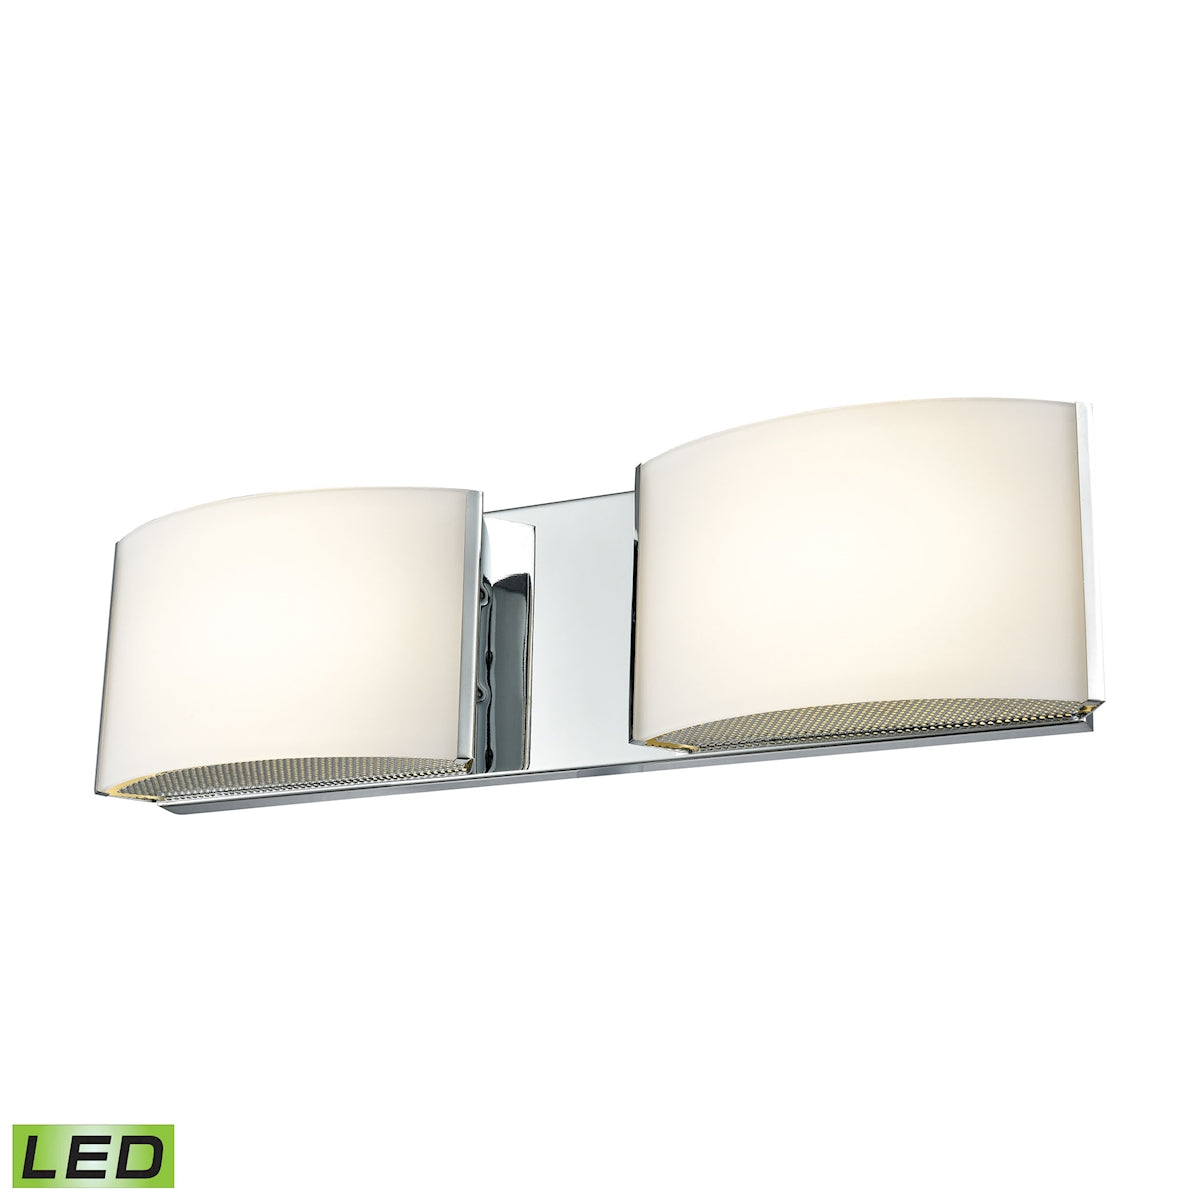 ELK Lighting BVL912-10-15 Pandora 2-Light Vanity Sconce in Chrome with Opal Glass - Integrated LED